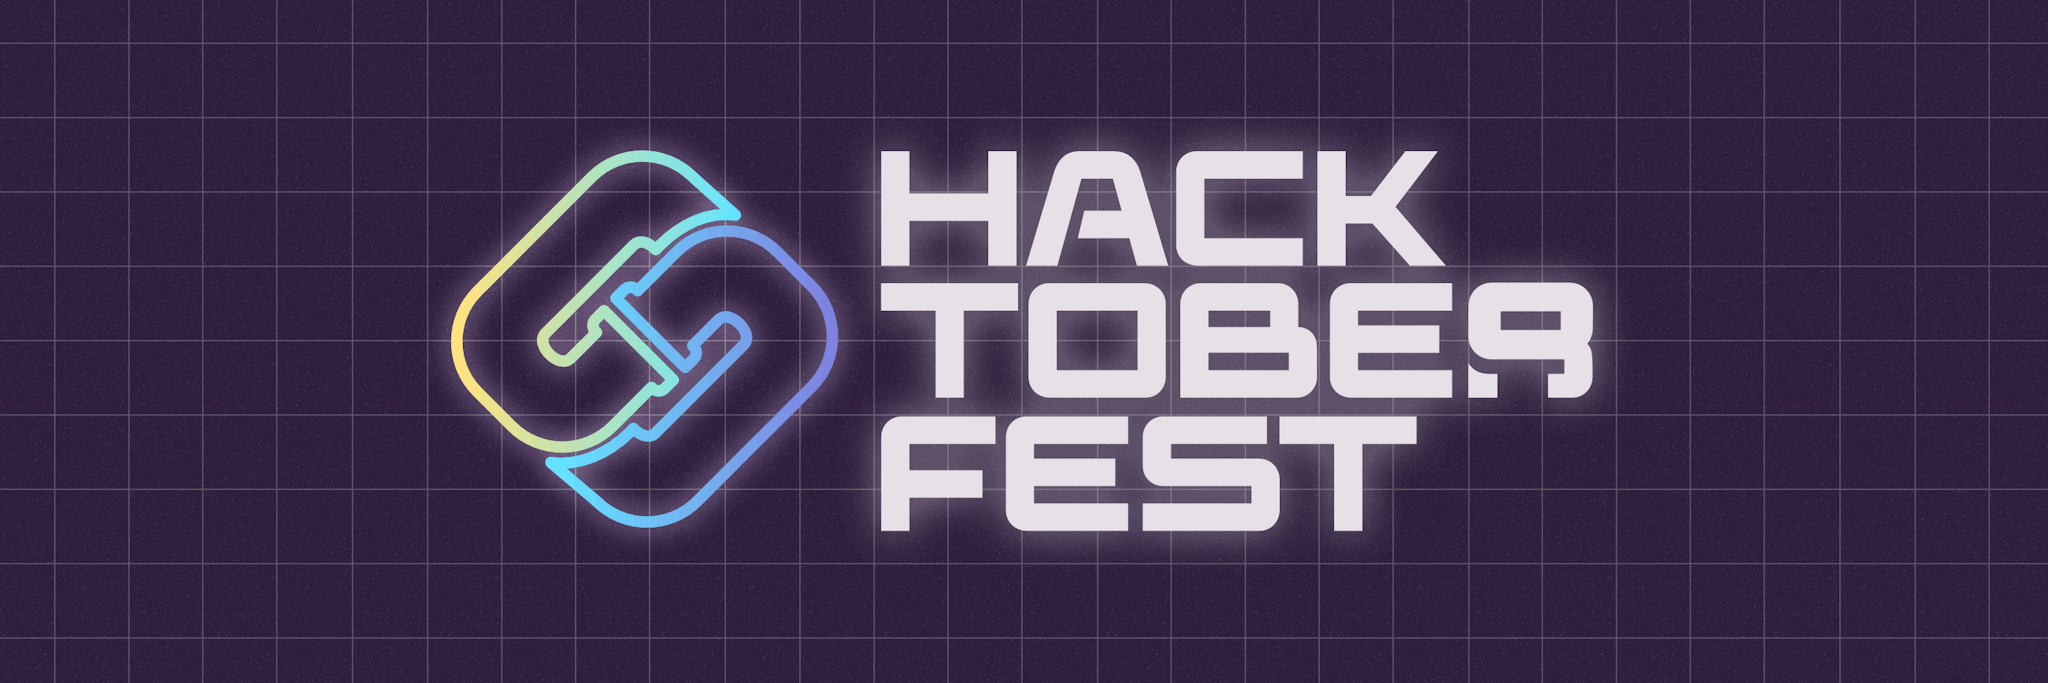 New plugins, CLI improvements, blog posts, and more: How the Steampipe community rallied together during Hacktoberfest.